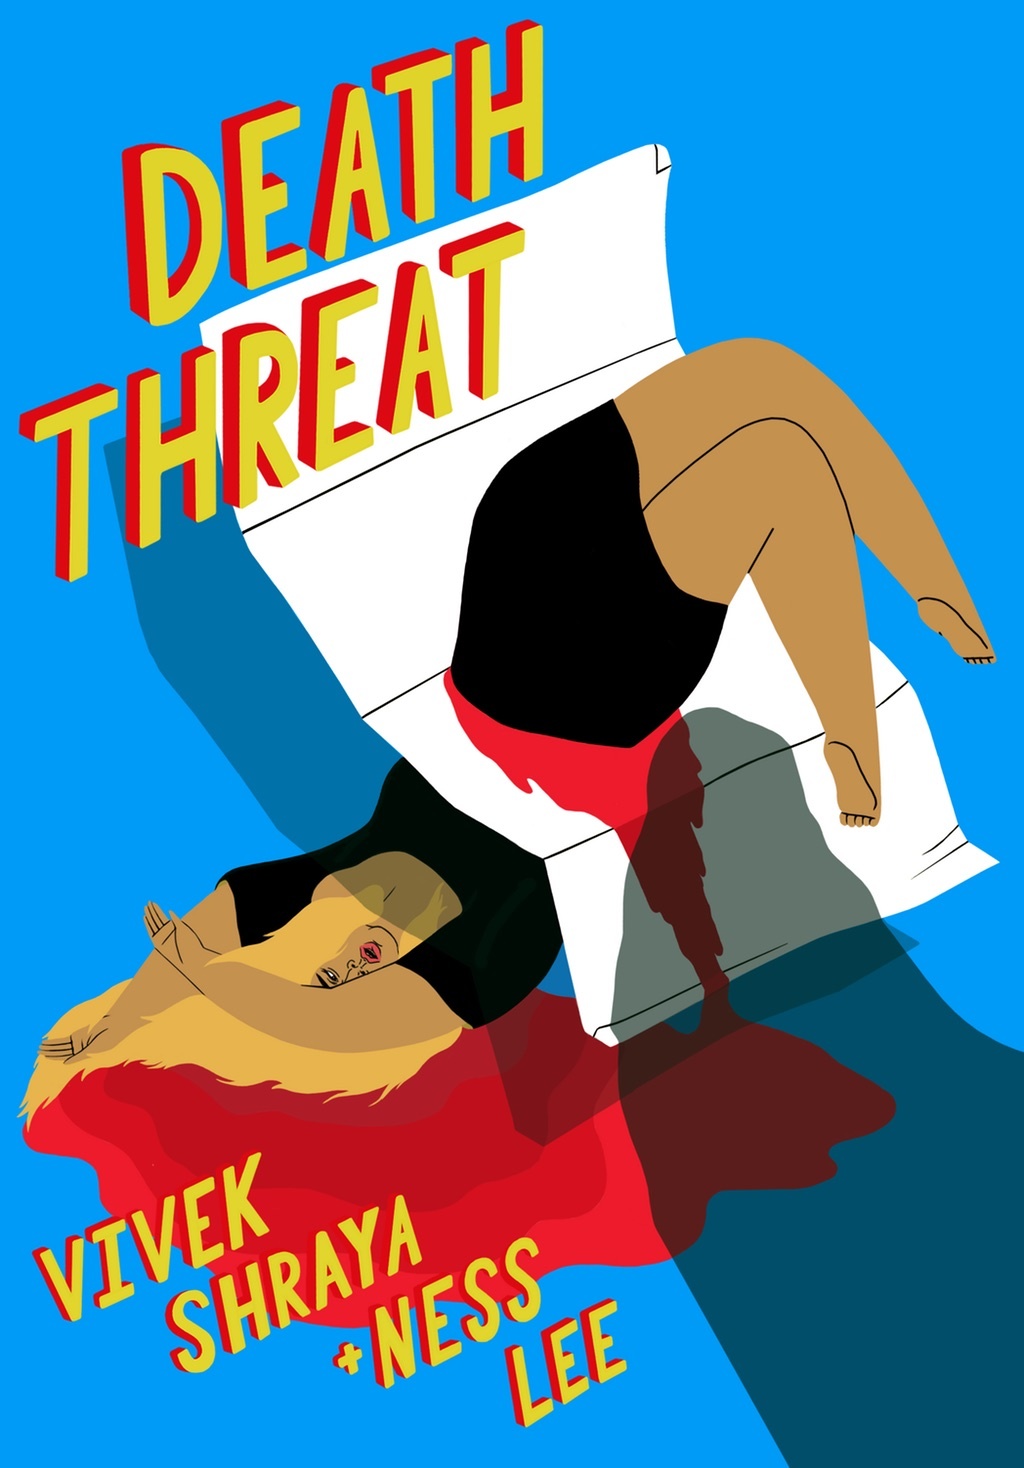 the cover of Death Threat, showing an illustration of a Brown woman bloodily bisected by a piece of paper